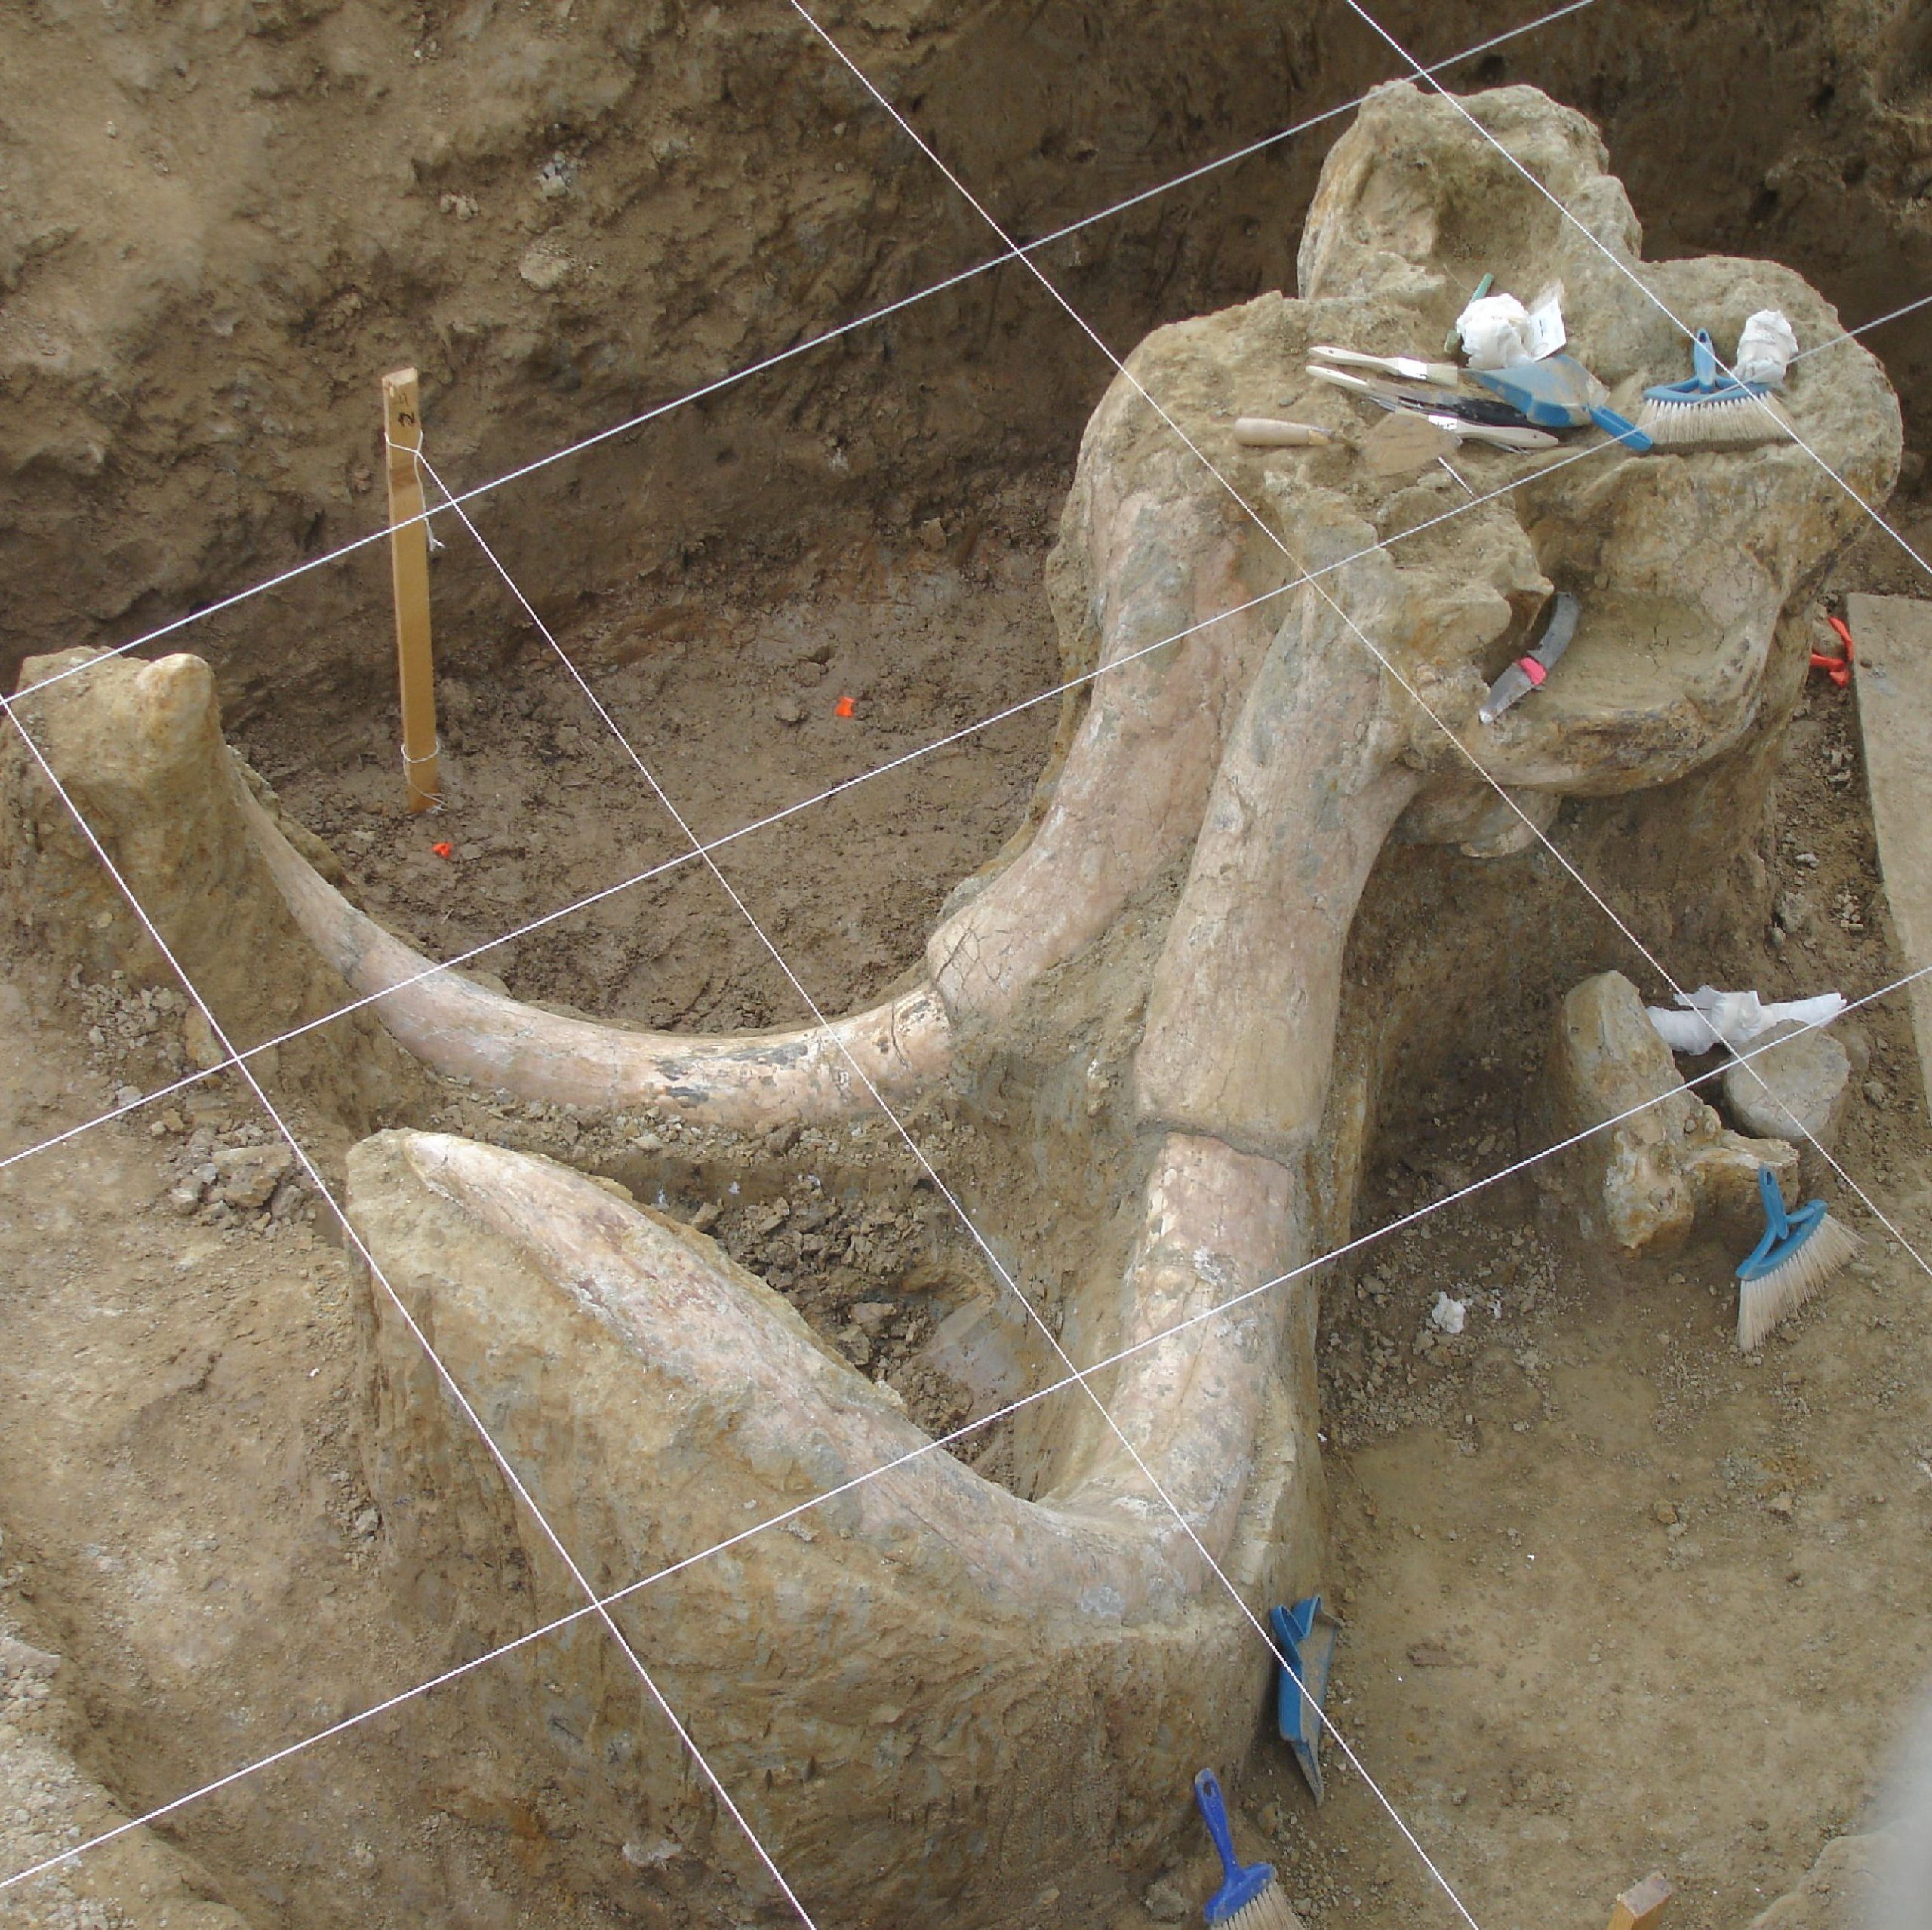 Excavation of the remains of a mammoth